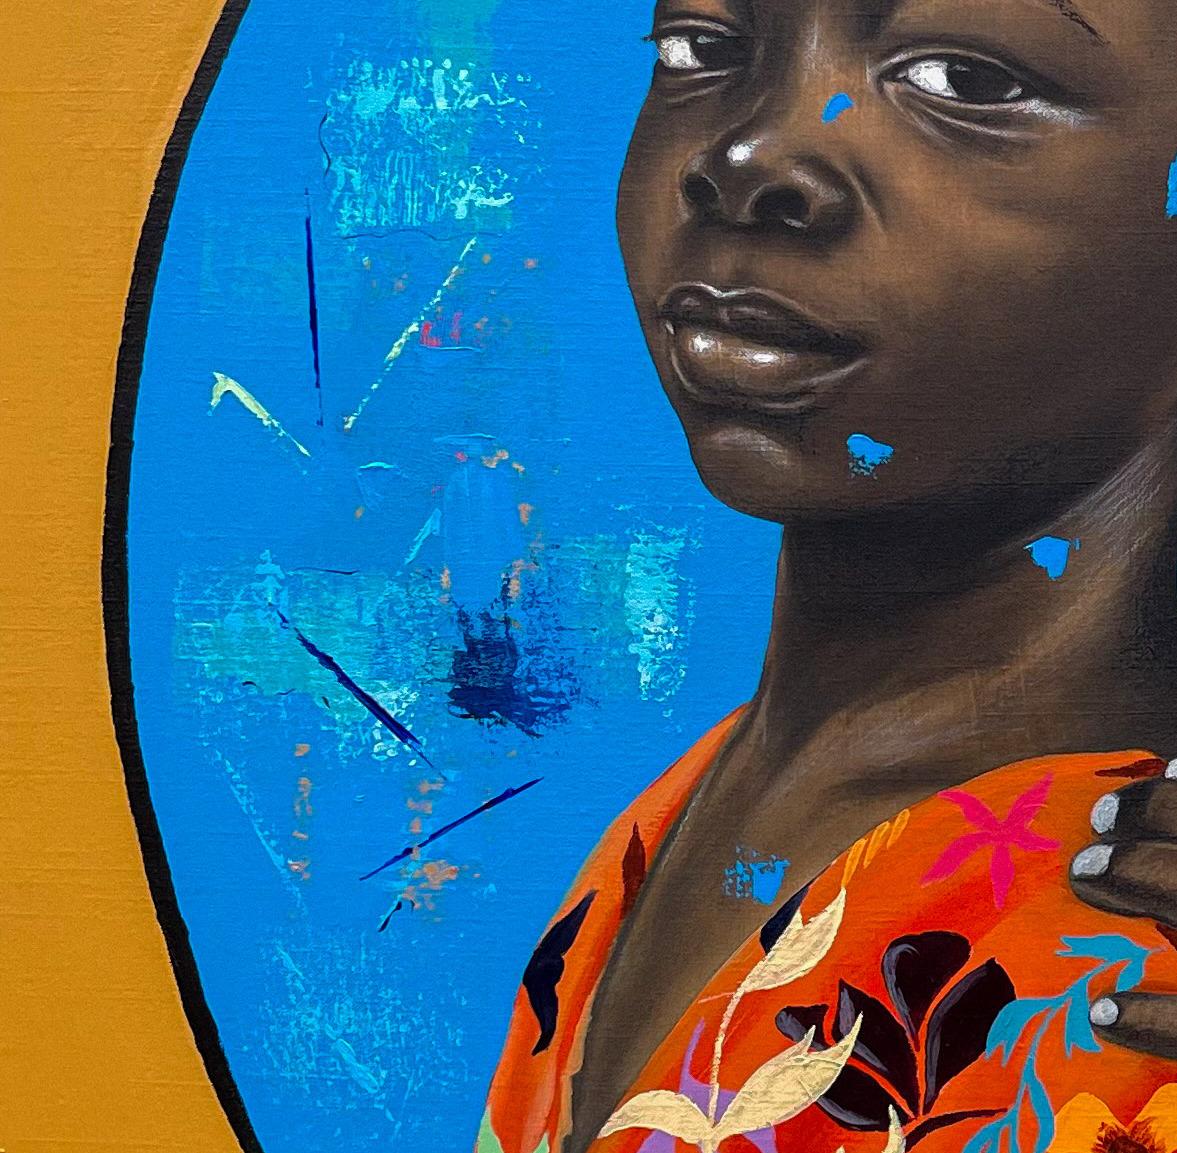 In Whom I can Rely On 2 (Twin)  - Contemporary Painting by Eyitayo Alagbe 